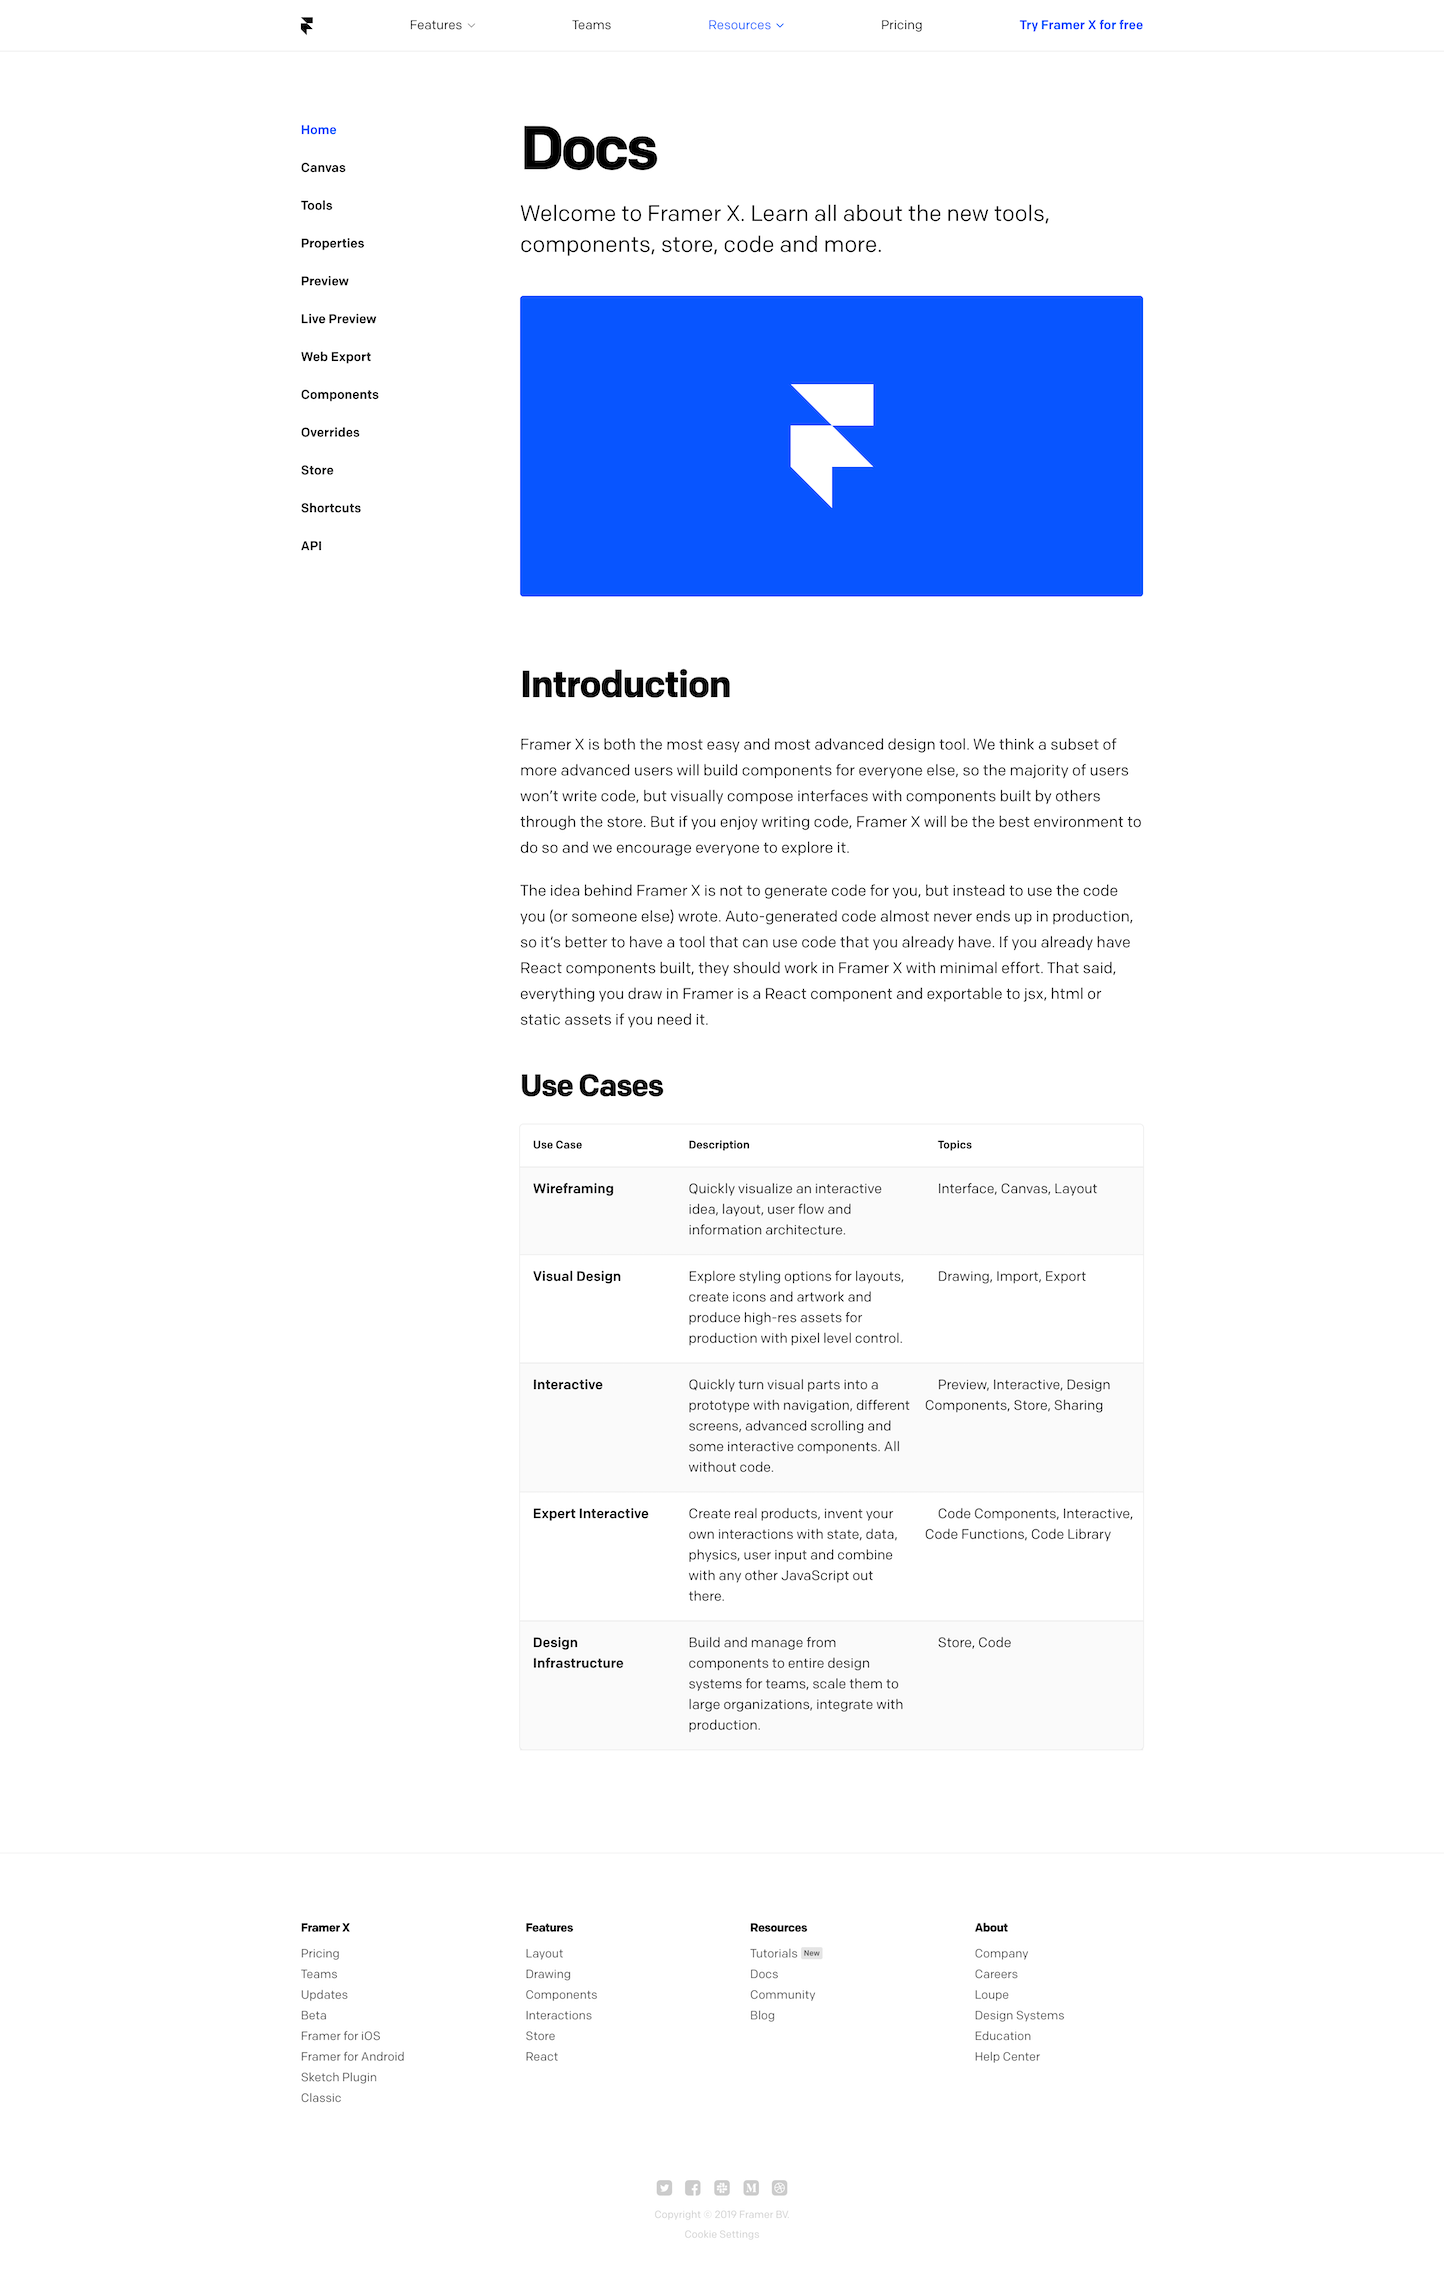 Screenshot of the Docs page from the Framer website.